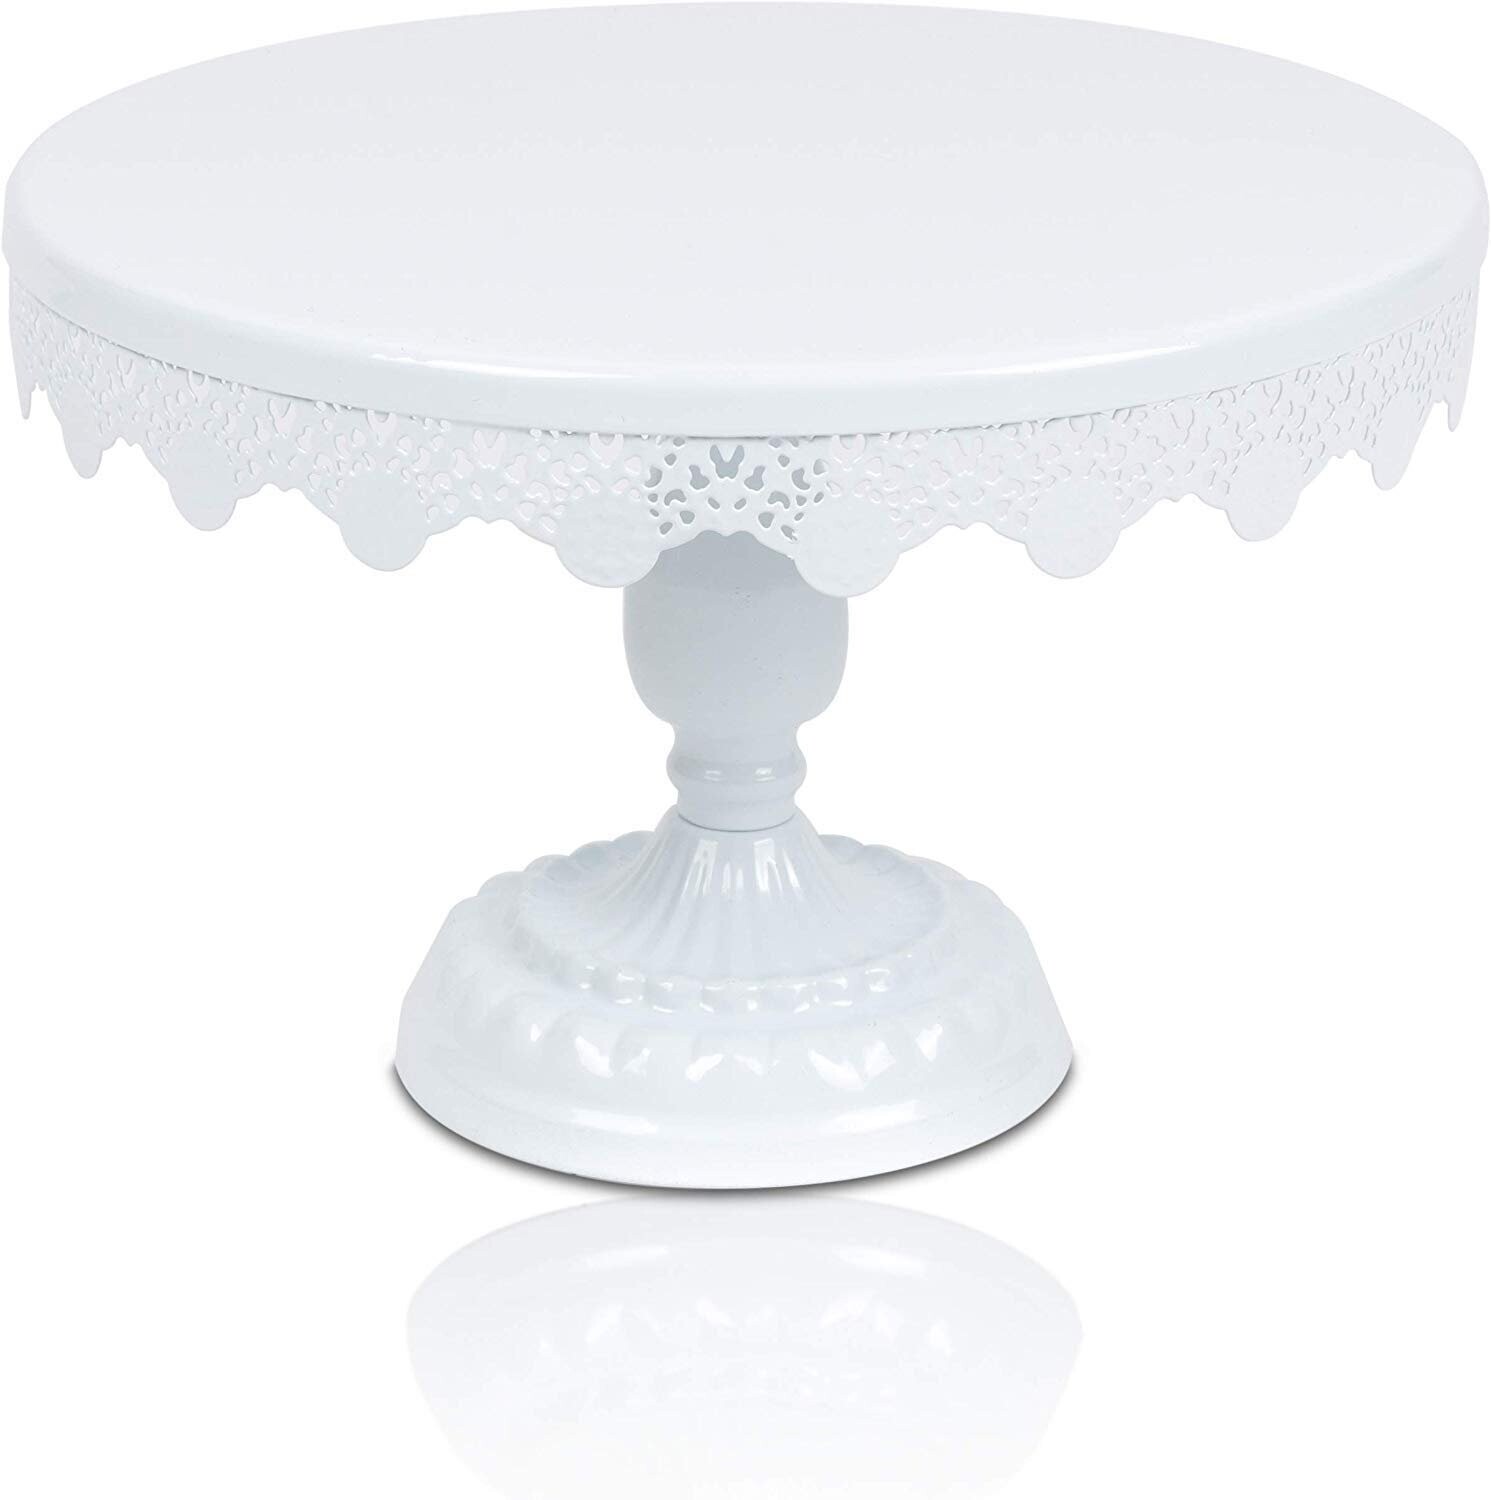 Cake Decor White Metal New Fancy Cake Pop Display Stand and Cupcake Stand (30cm Diameter )